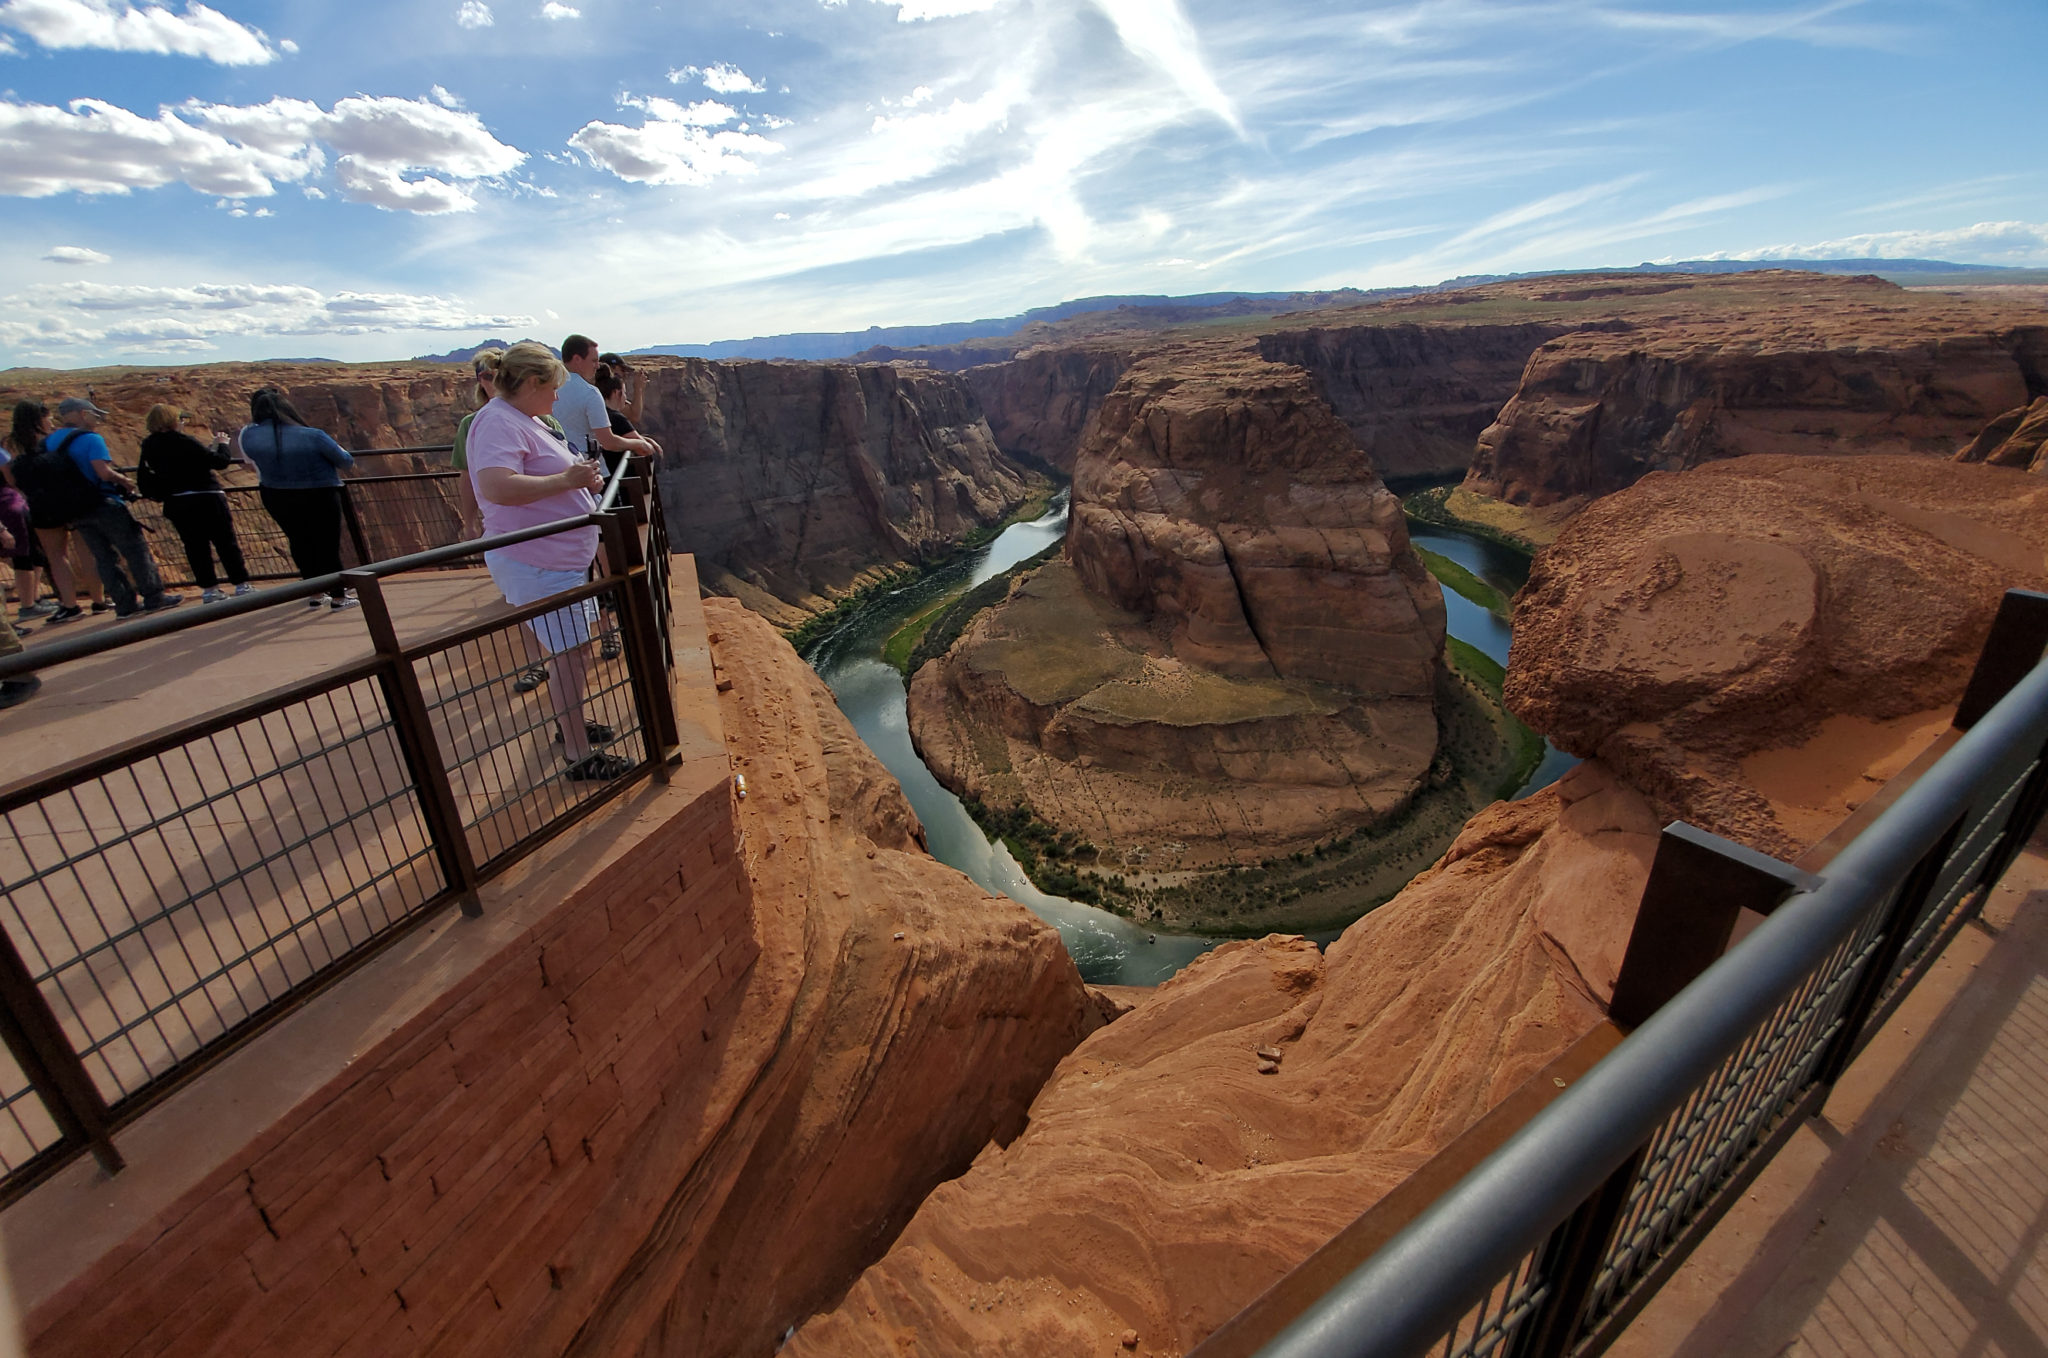 Getting to Horseshoe Bend is a trek, but it's worth seeing this beautiful site!